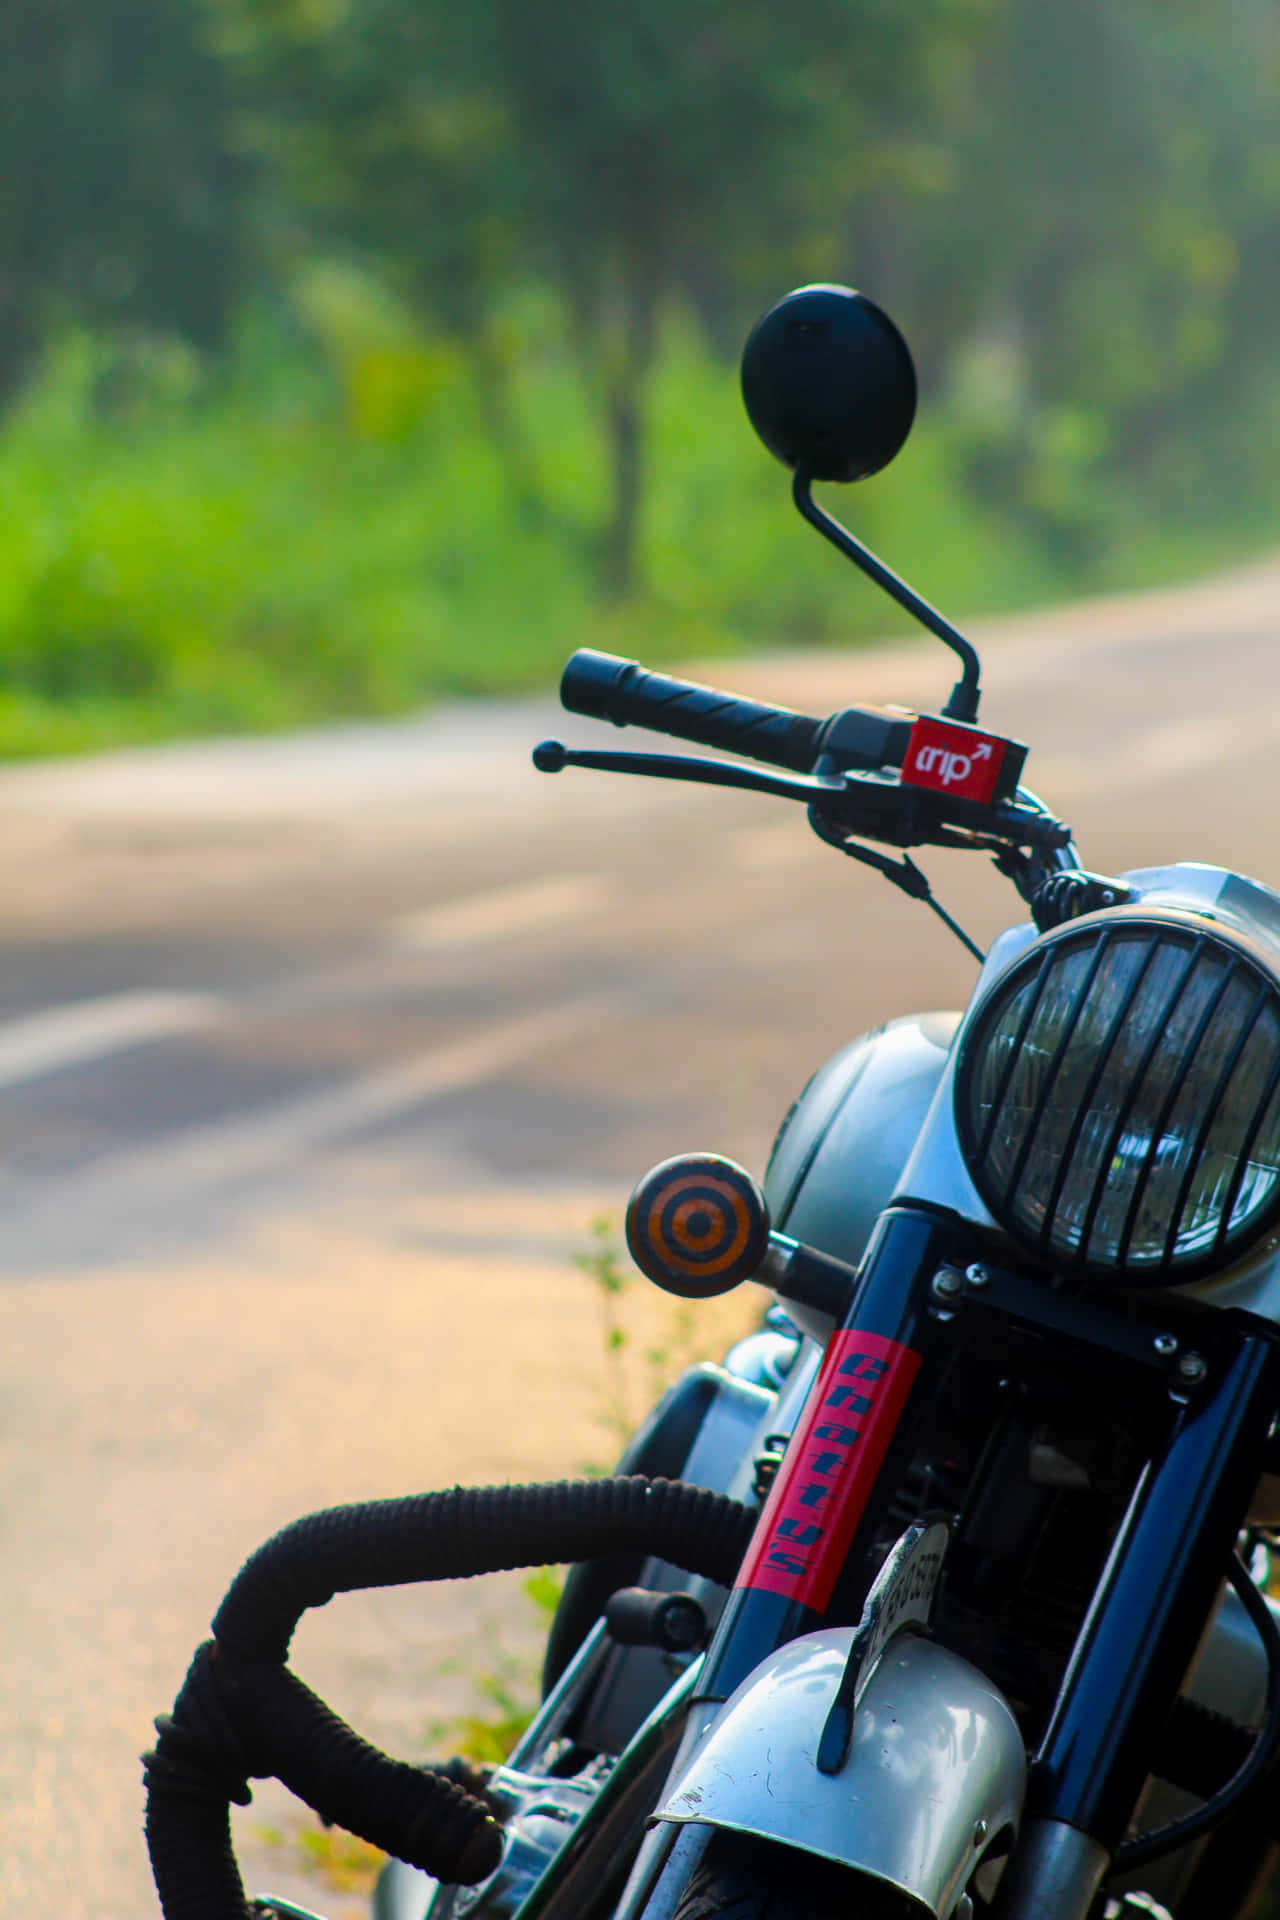 "The Iconic Royal Enfield Bullet"